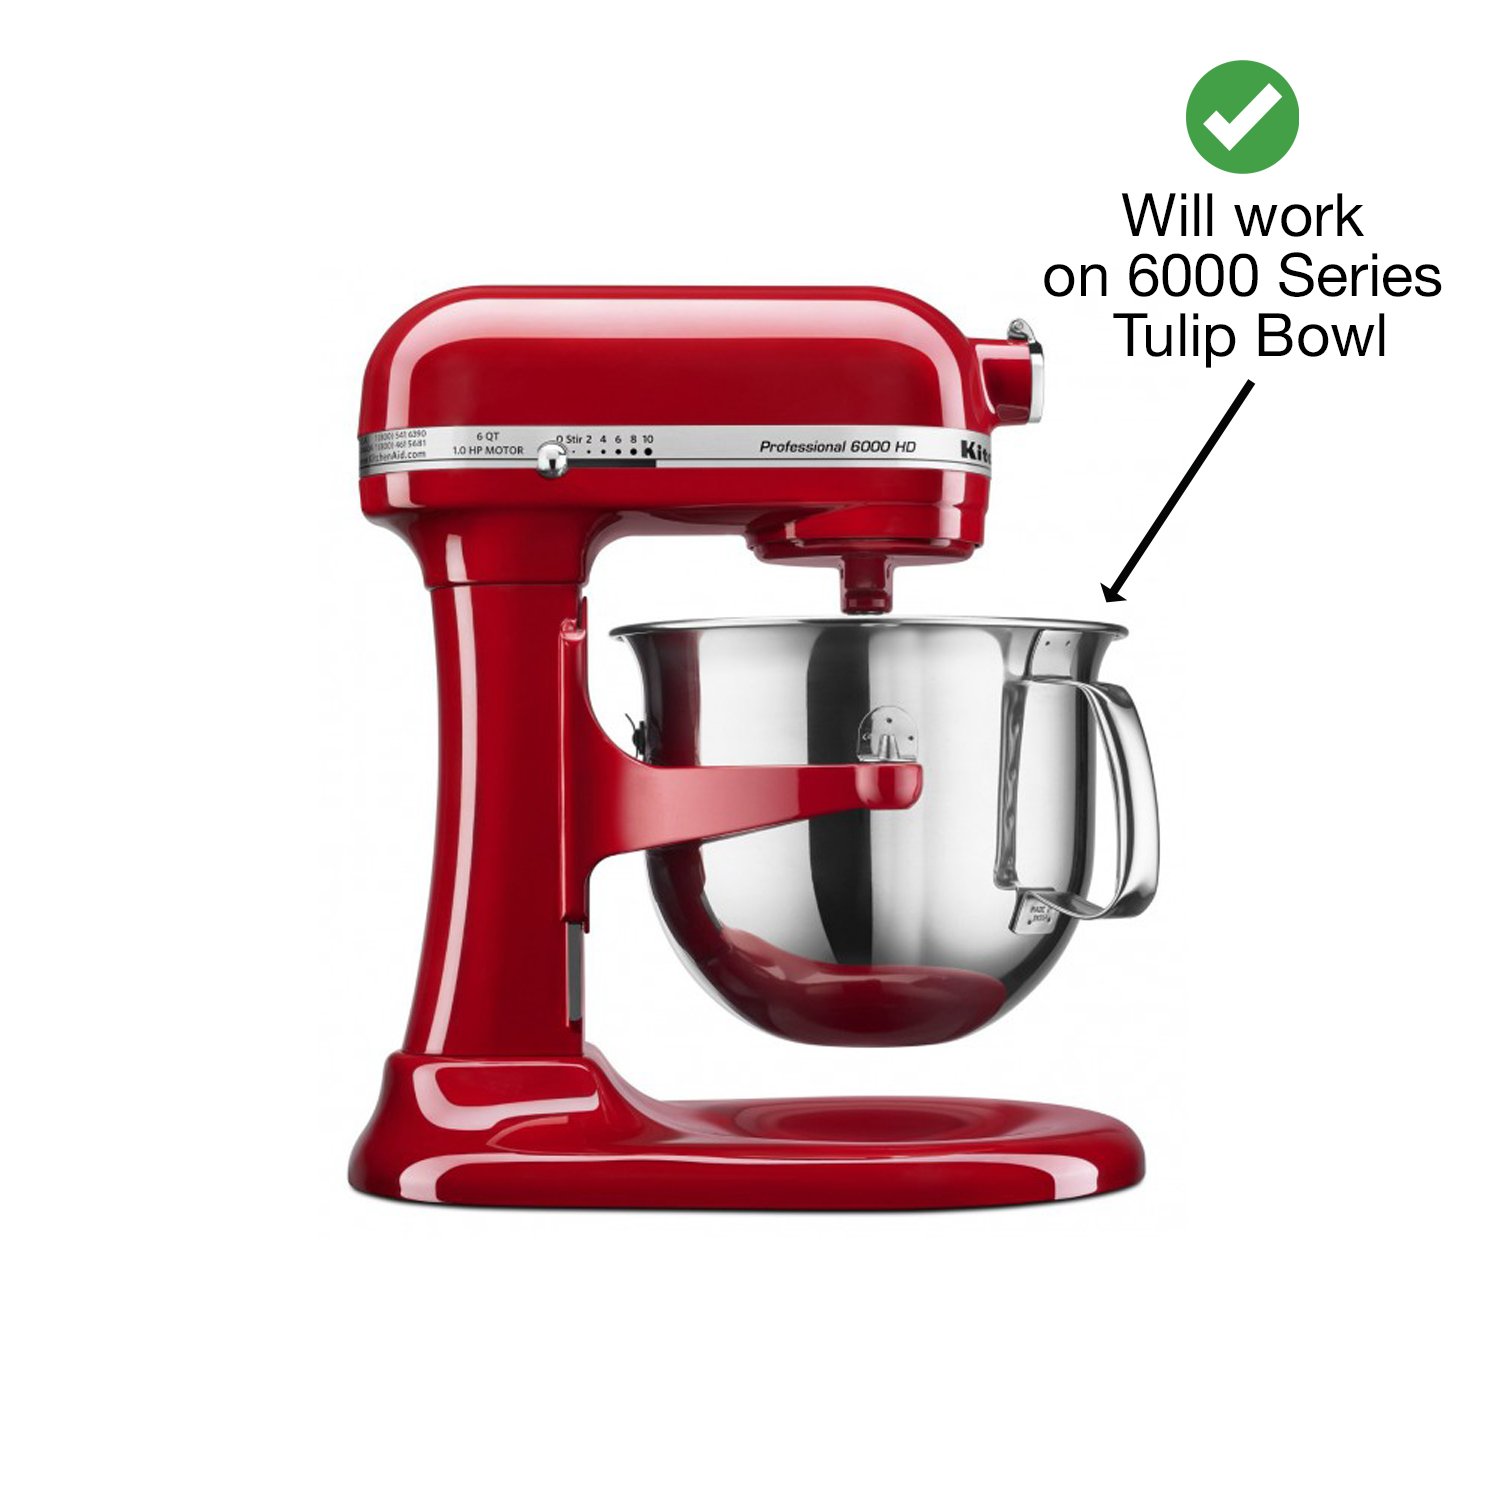 BeaterBlade for KitchenAid 5-Quart Bowl-Lift Mixers | Red - image 2 of 8